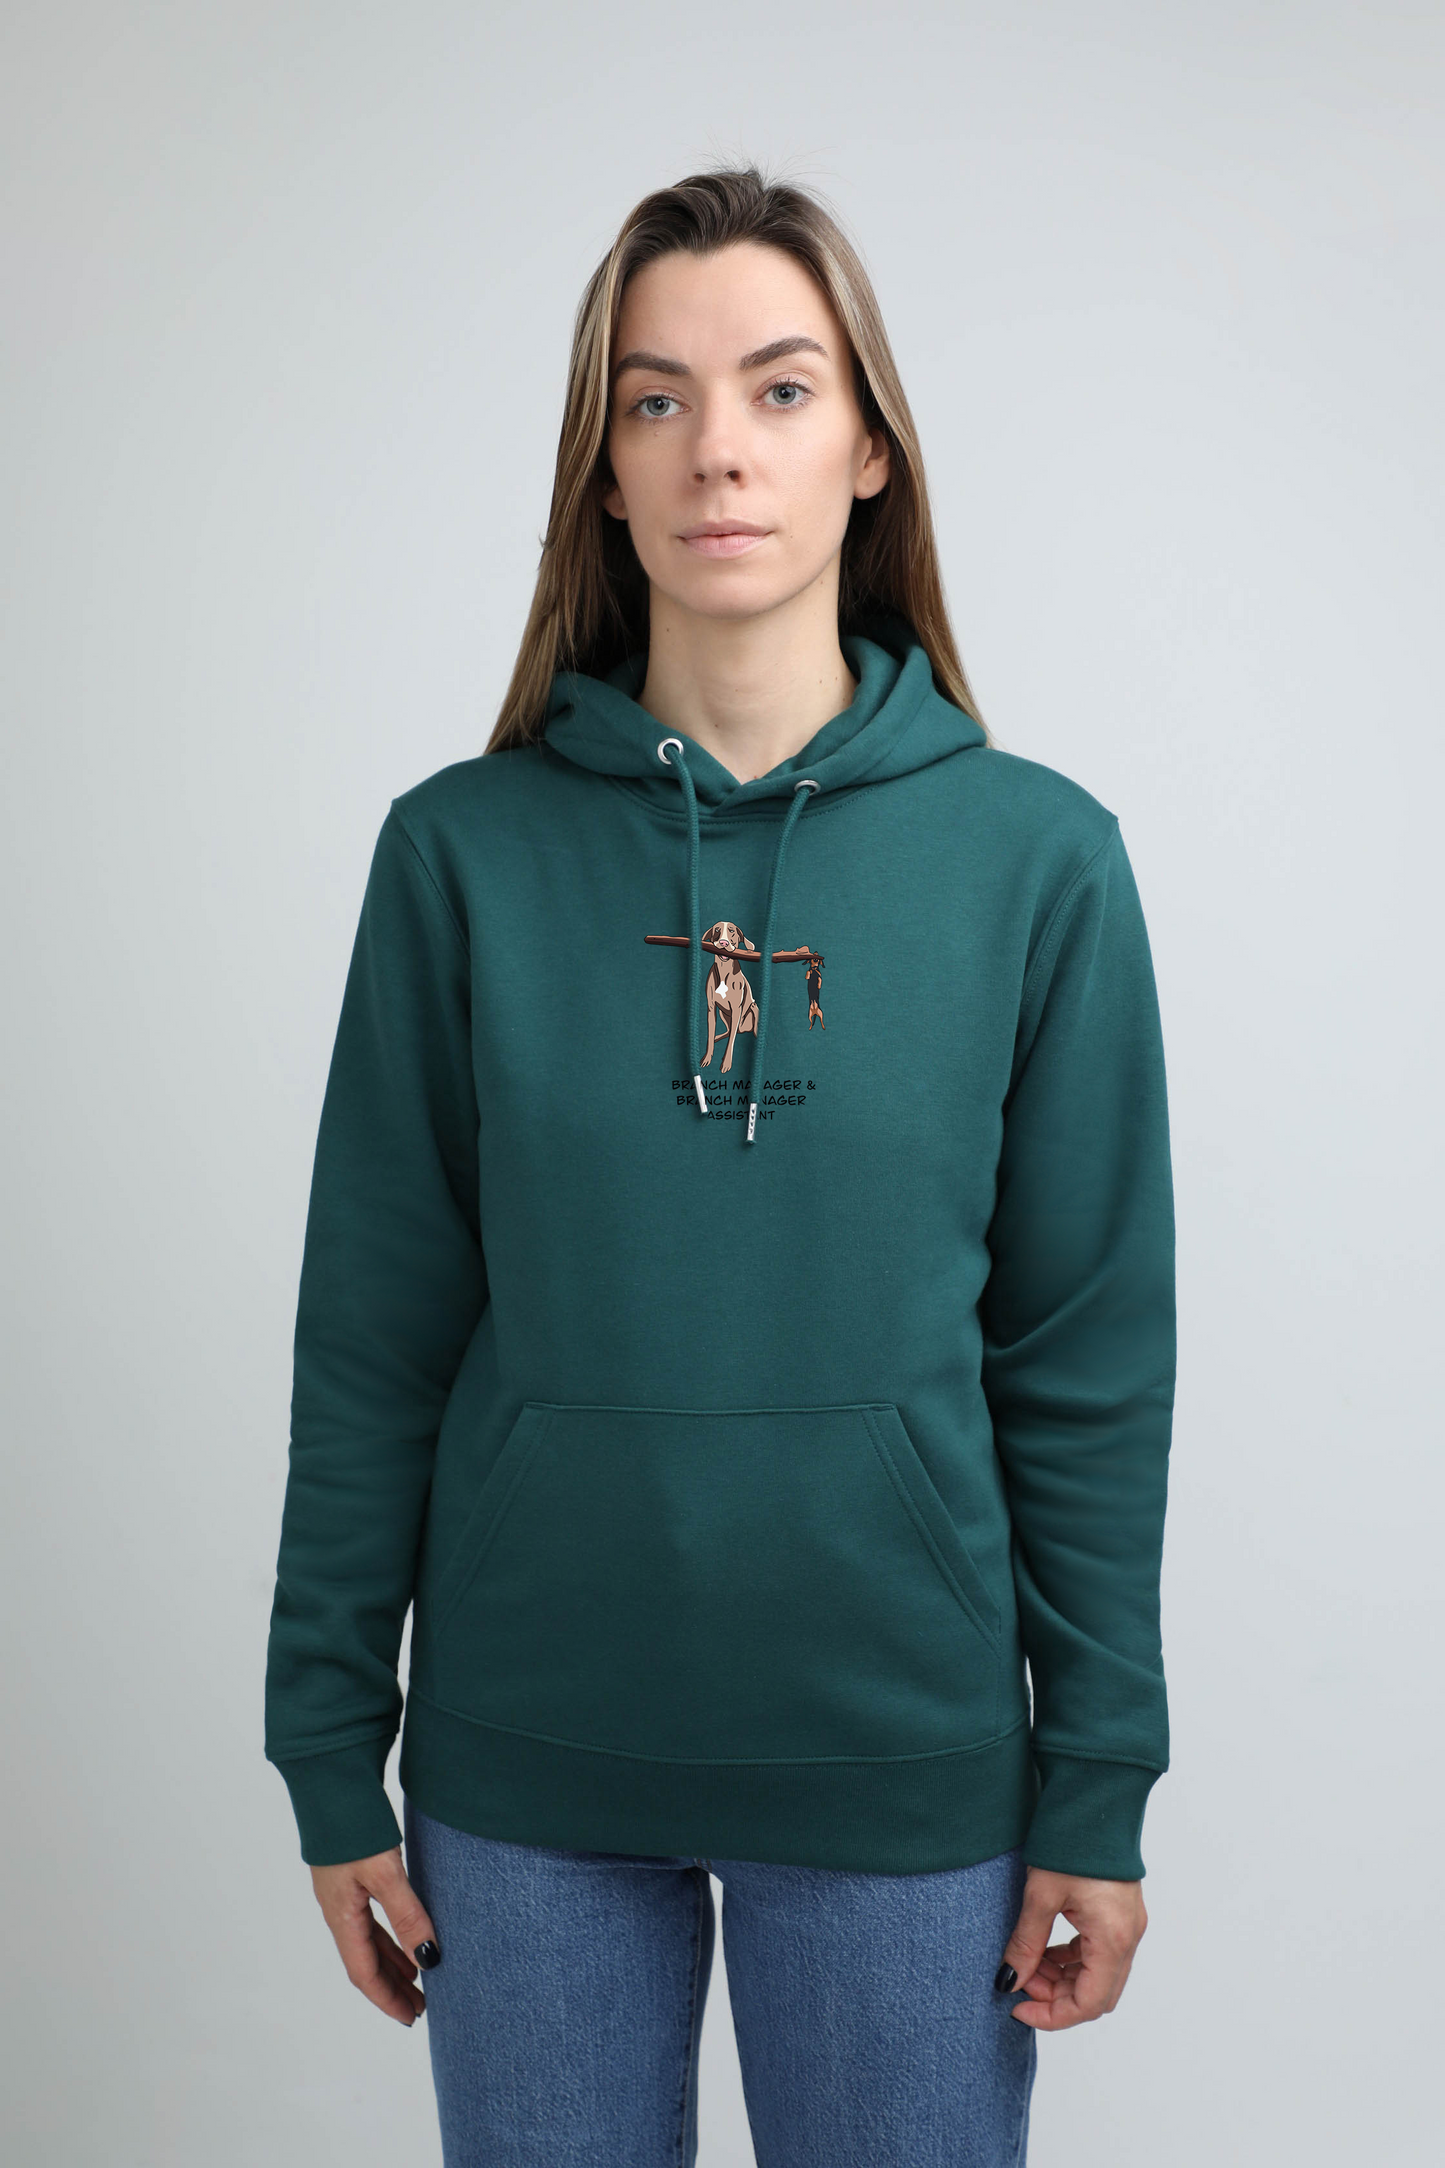 Manager dog | Hoodie with dog. Regular fit | Unisex by My Wild Other